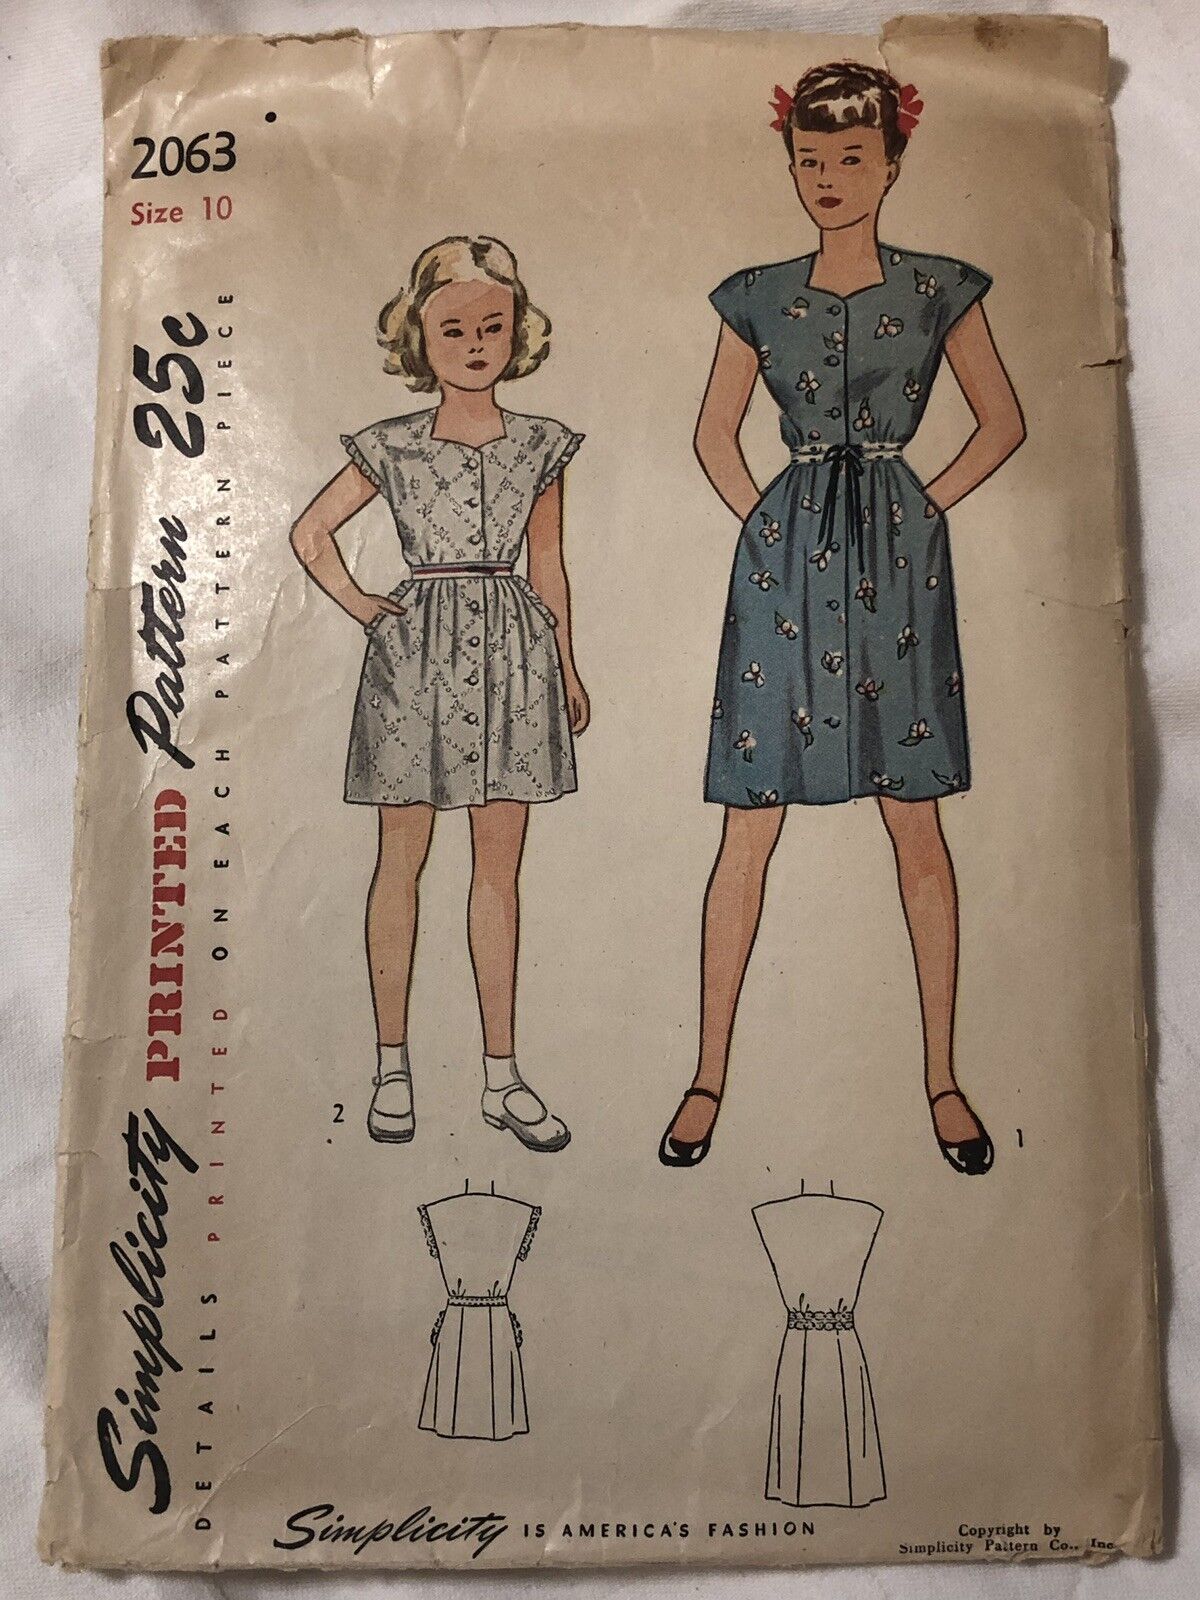 Vintage Simplicity Printed Pattern 2063 Girls Pocketed Dress Cap Sleeve Size 10